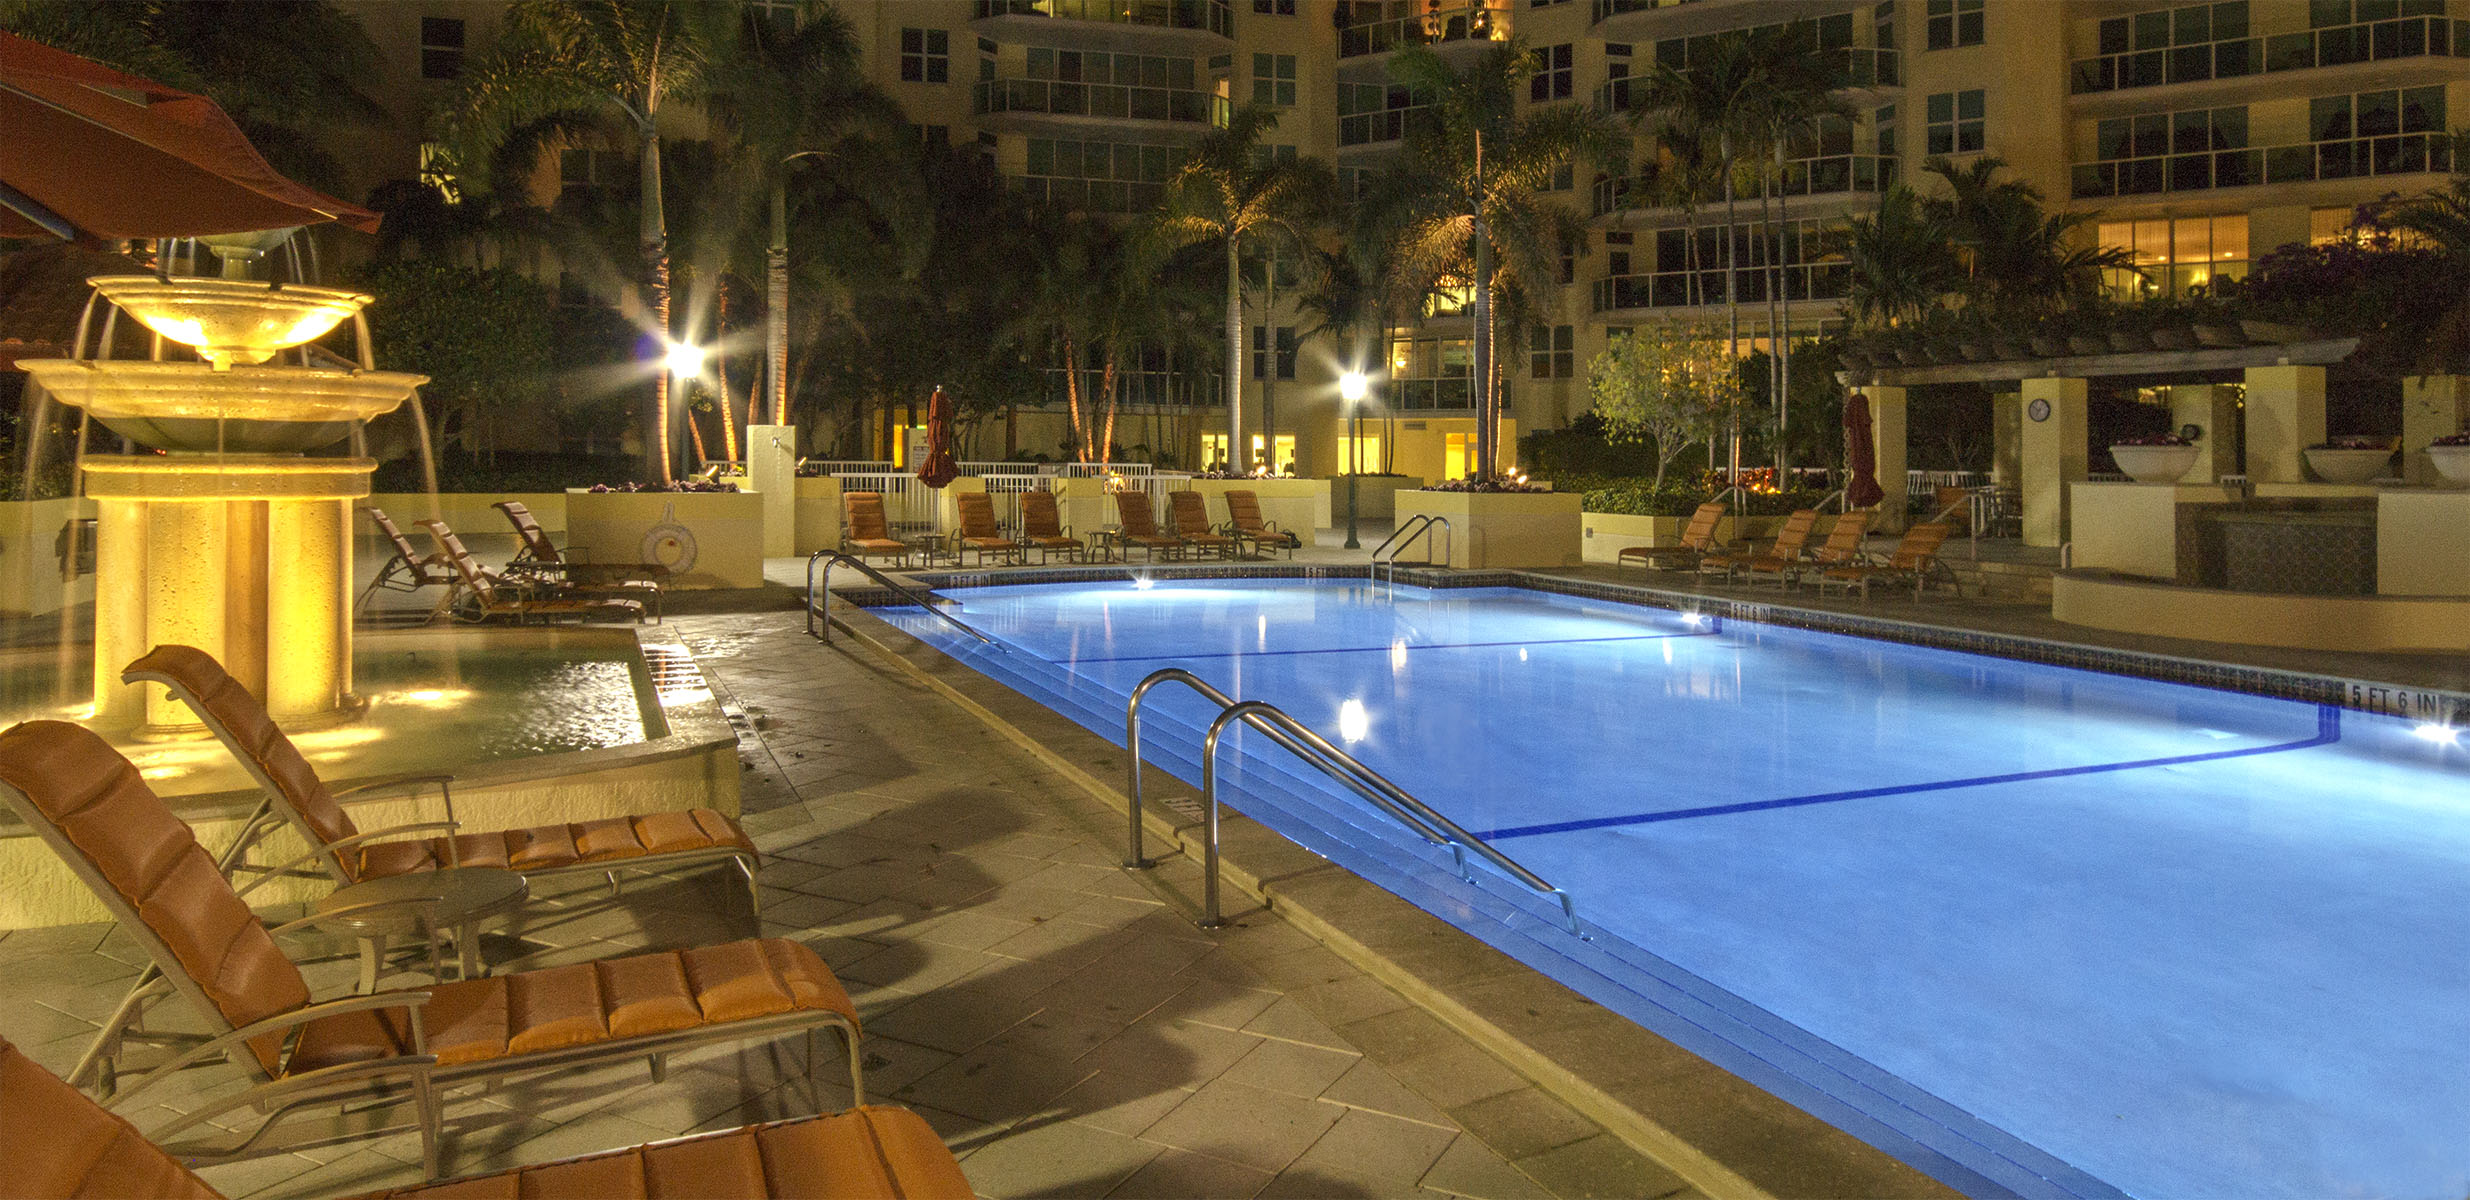 Townsend Place pool at night